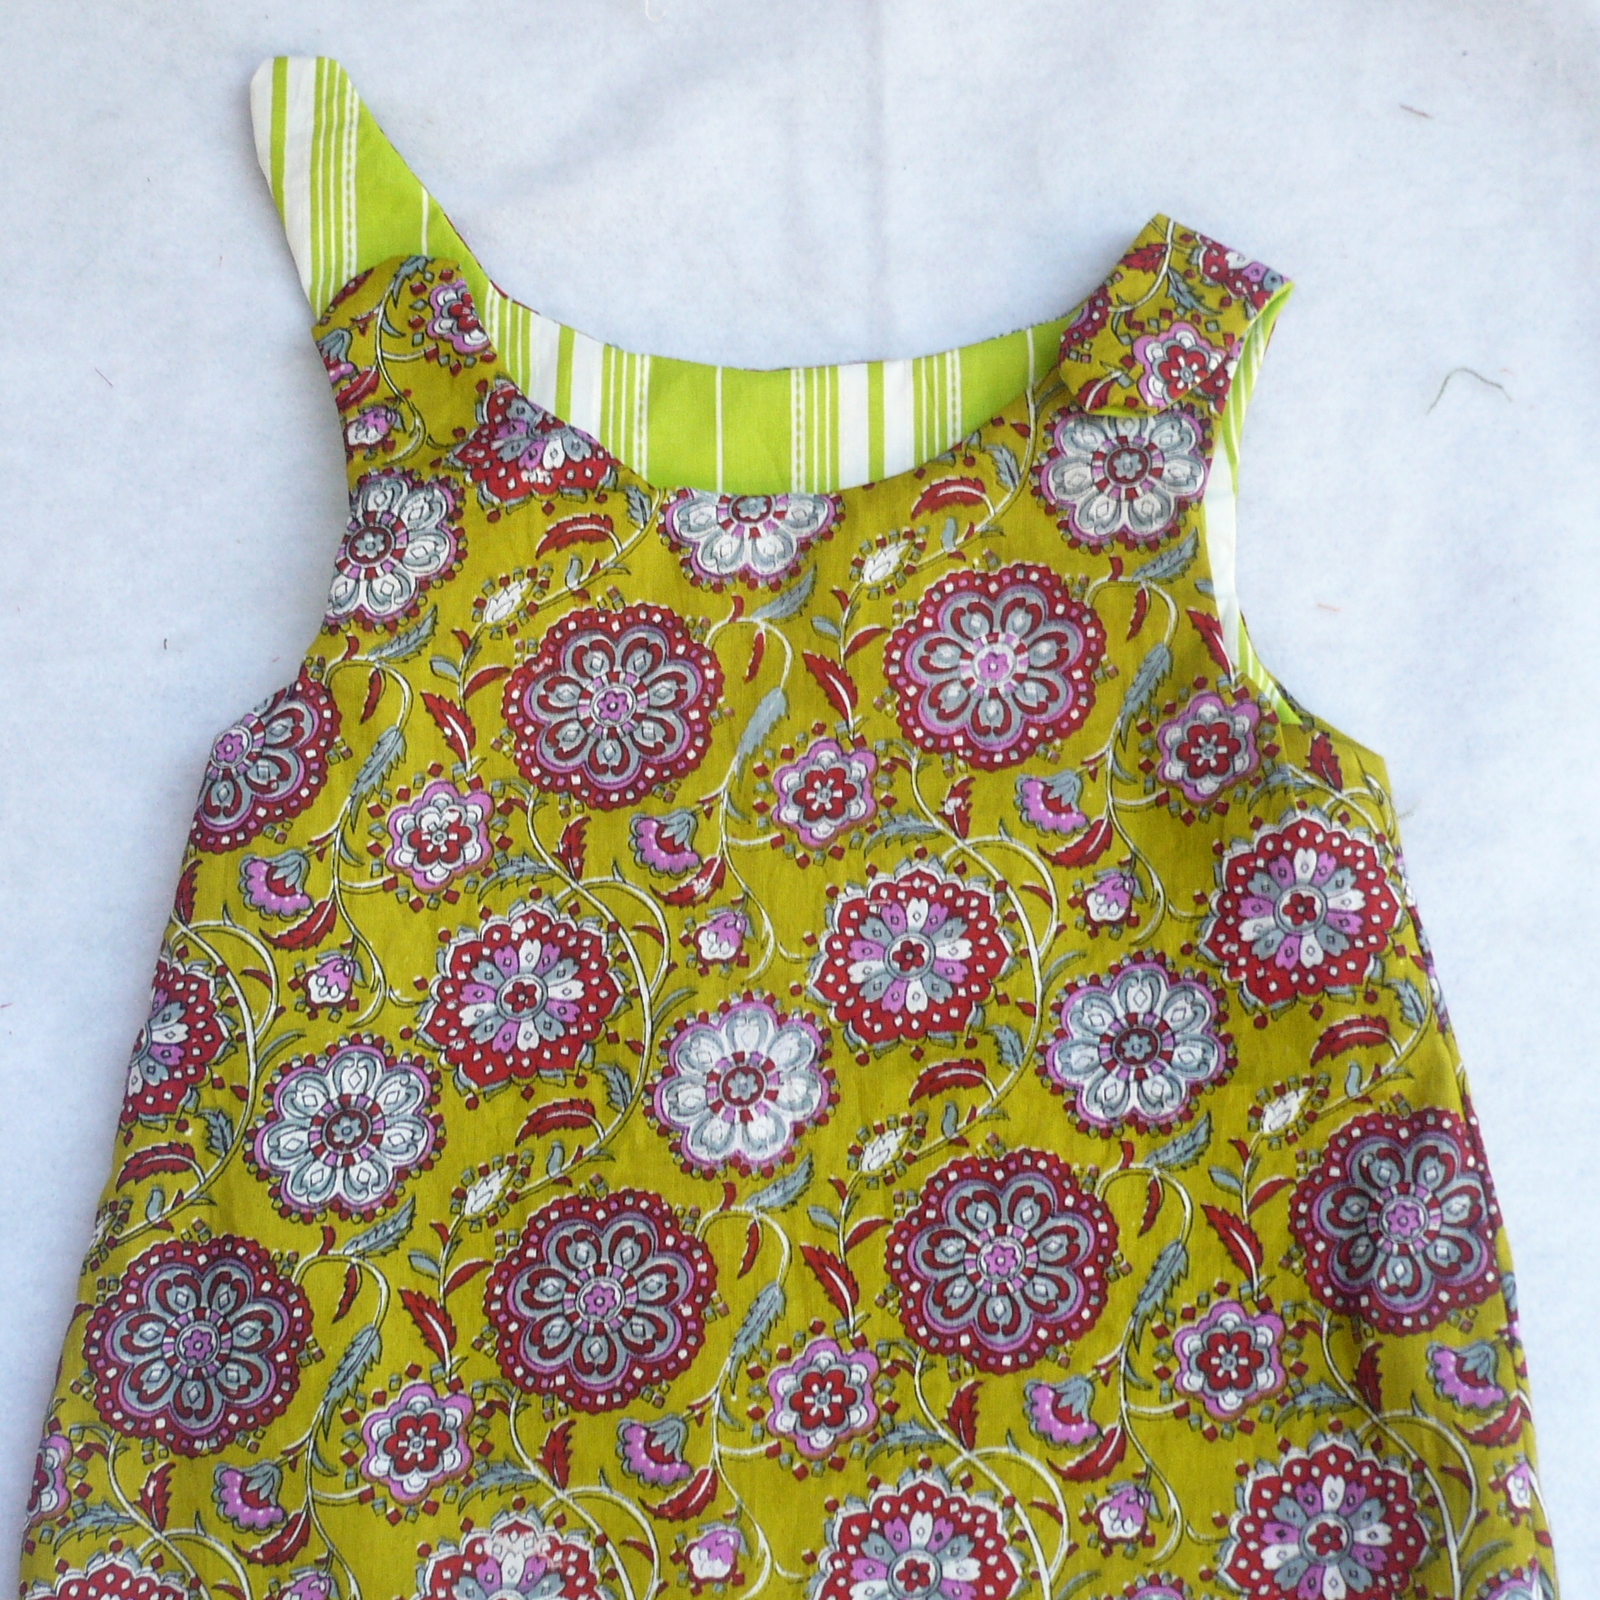 turning out a reversible dress